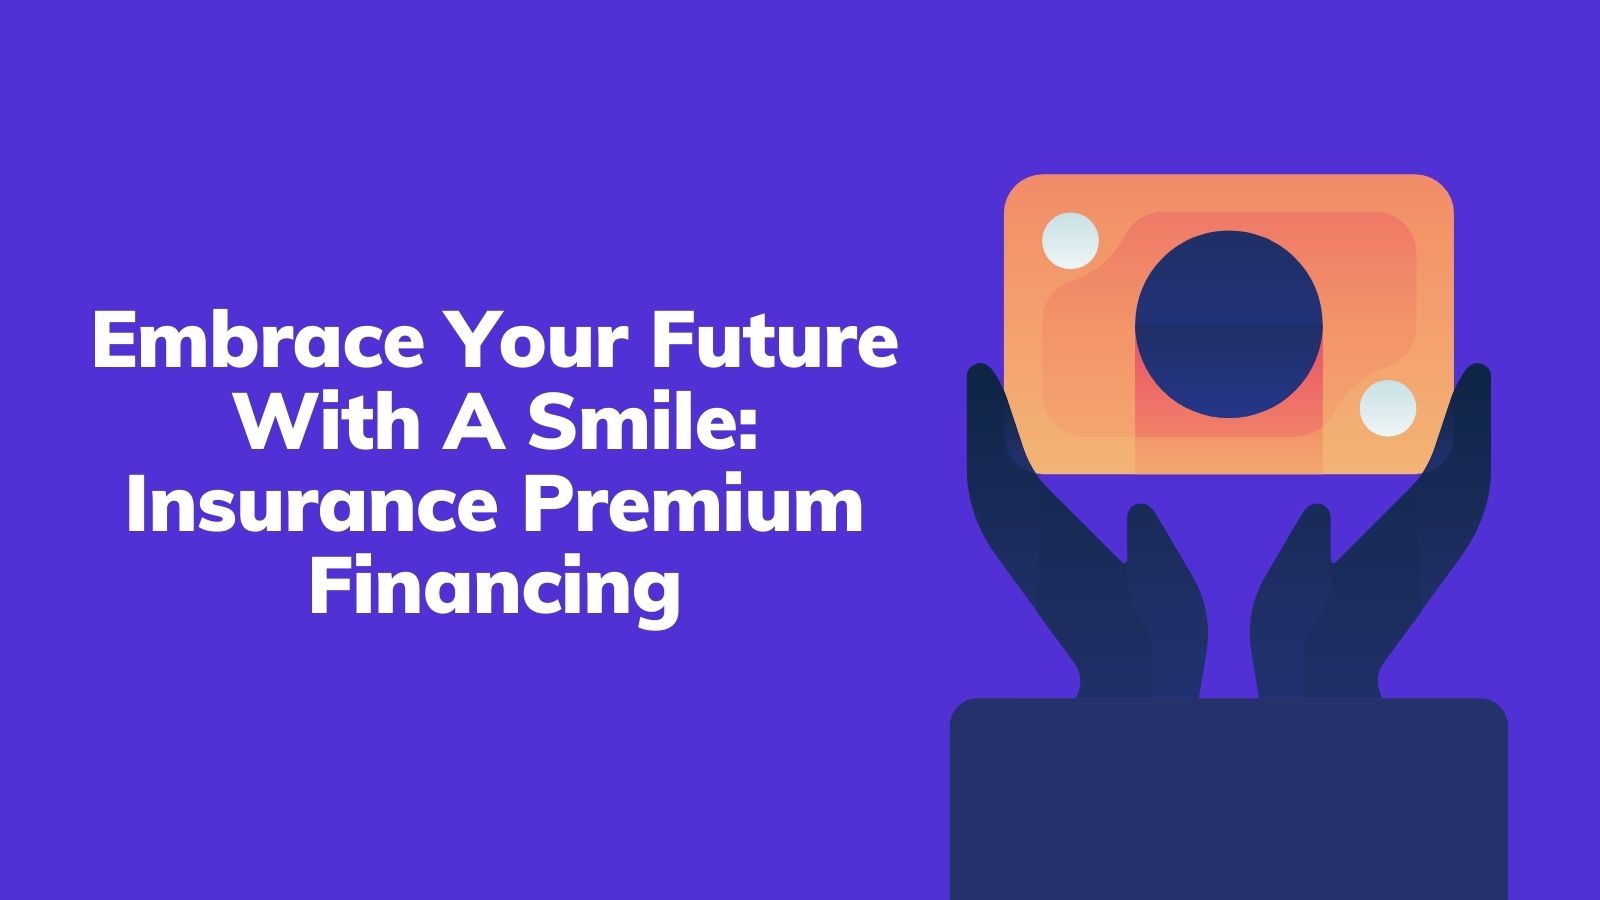 Embrace Your Future With A Smile: Insurance Premium Financing